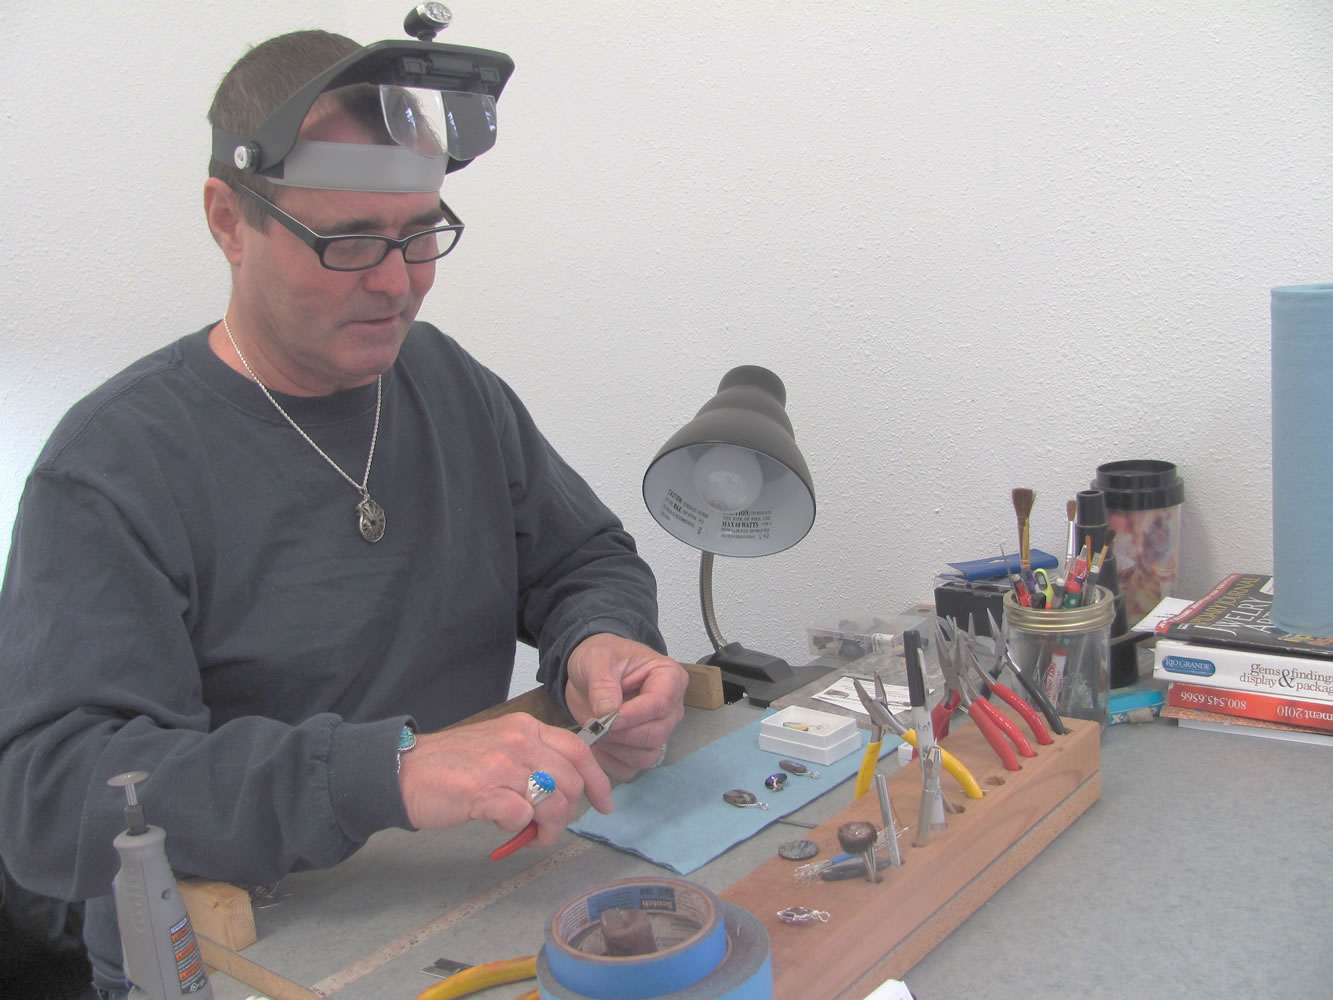 Mark Lewis uses round nose pliers to shape sterling silver wire for a sculptured pendant. He also makes earrings and bracelets, while working with semi-precious stones, Dichoric glass, fossils and cabochons.